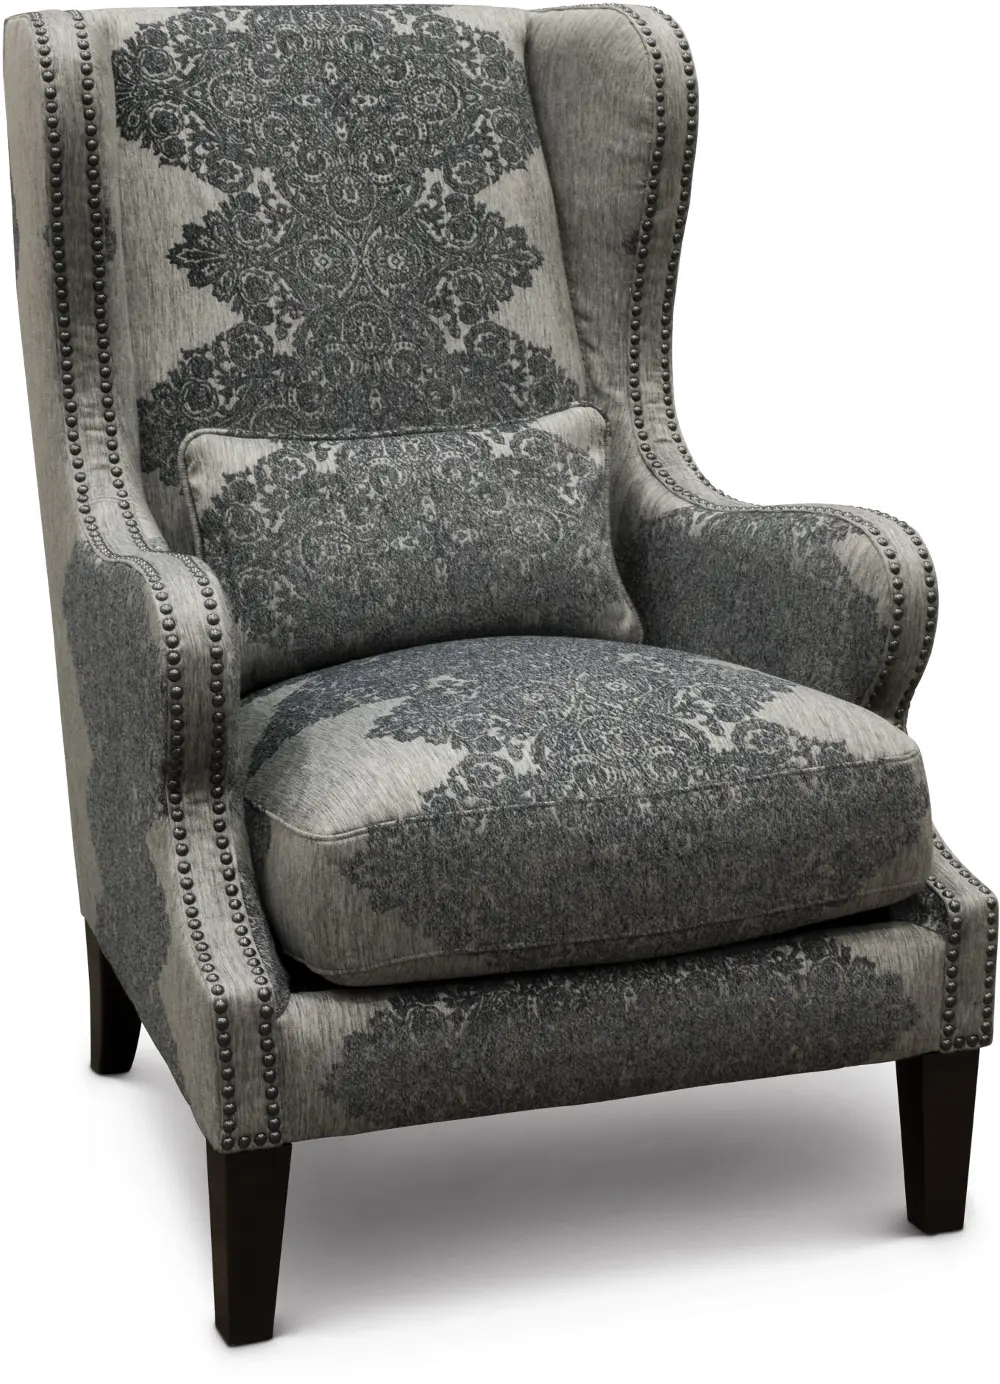 Classic Gray Wingback Chair - St. James-1